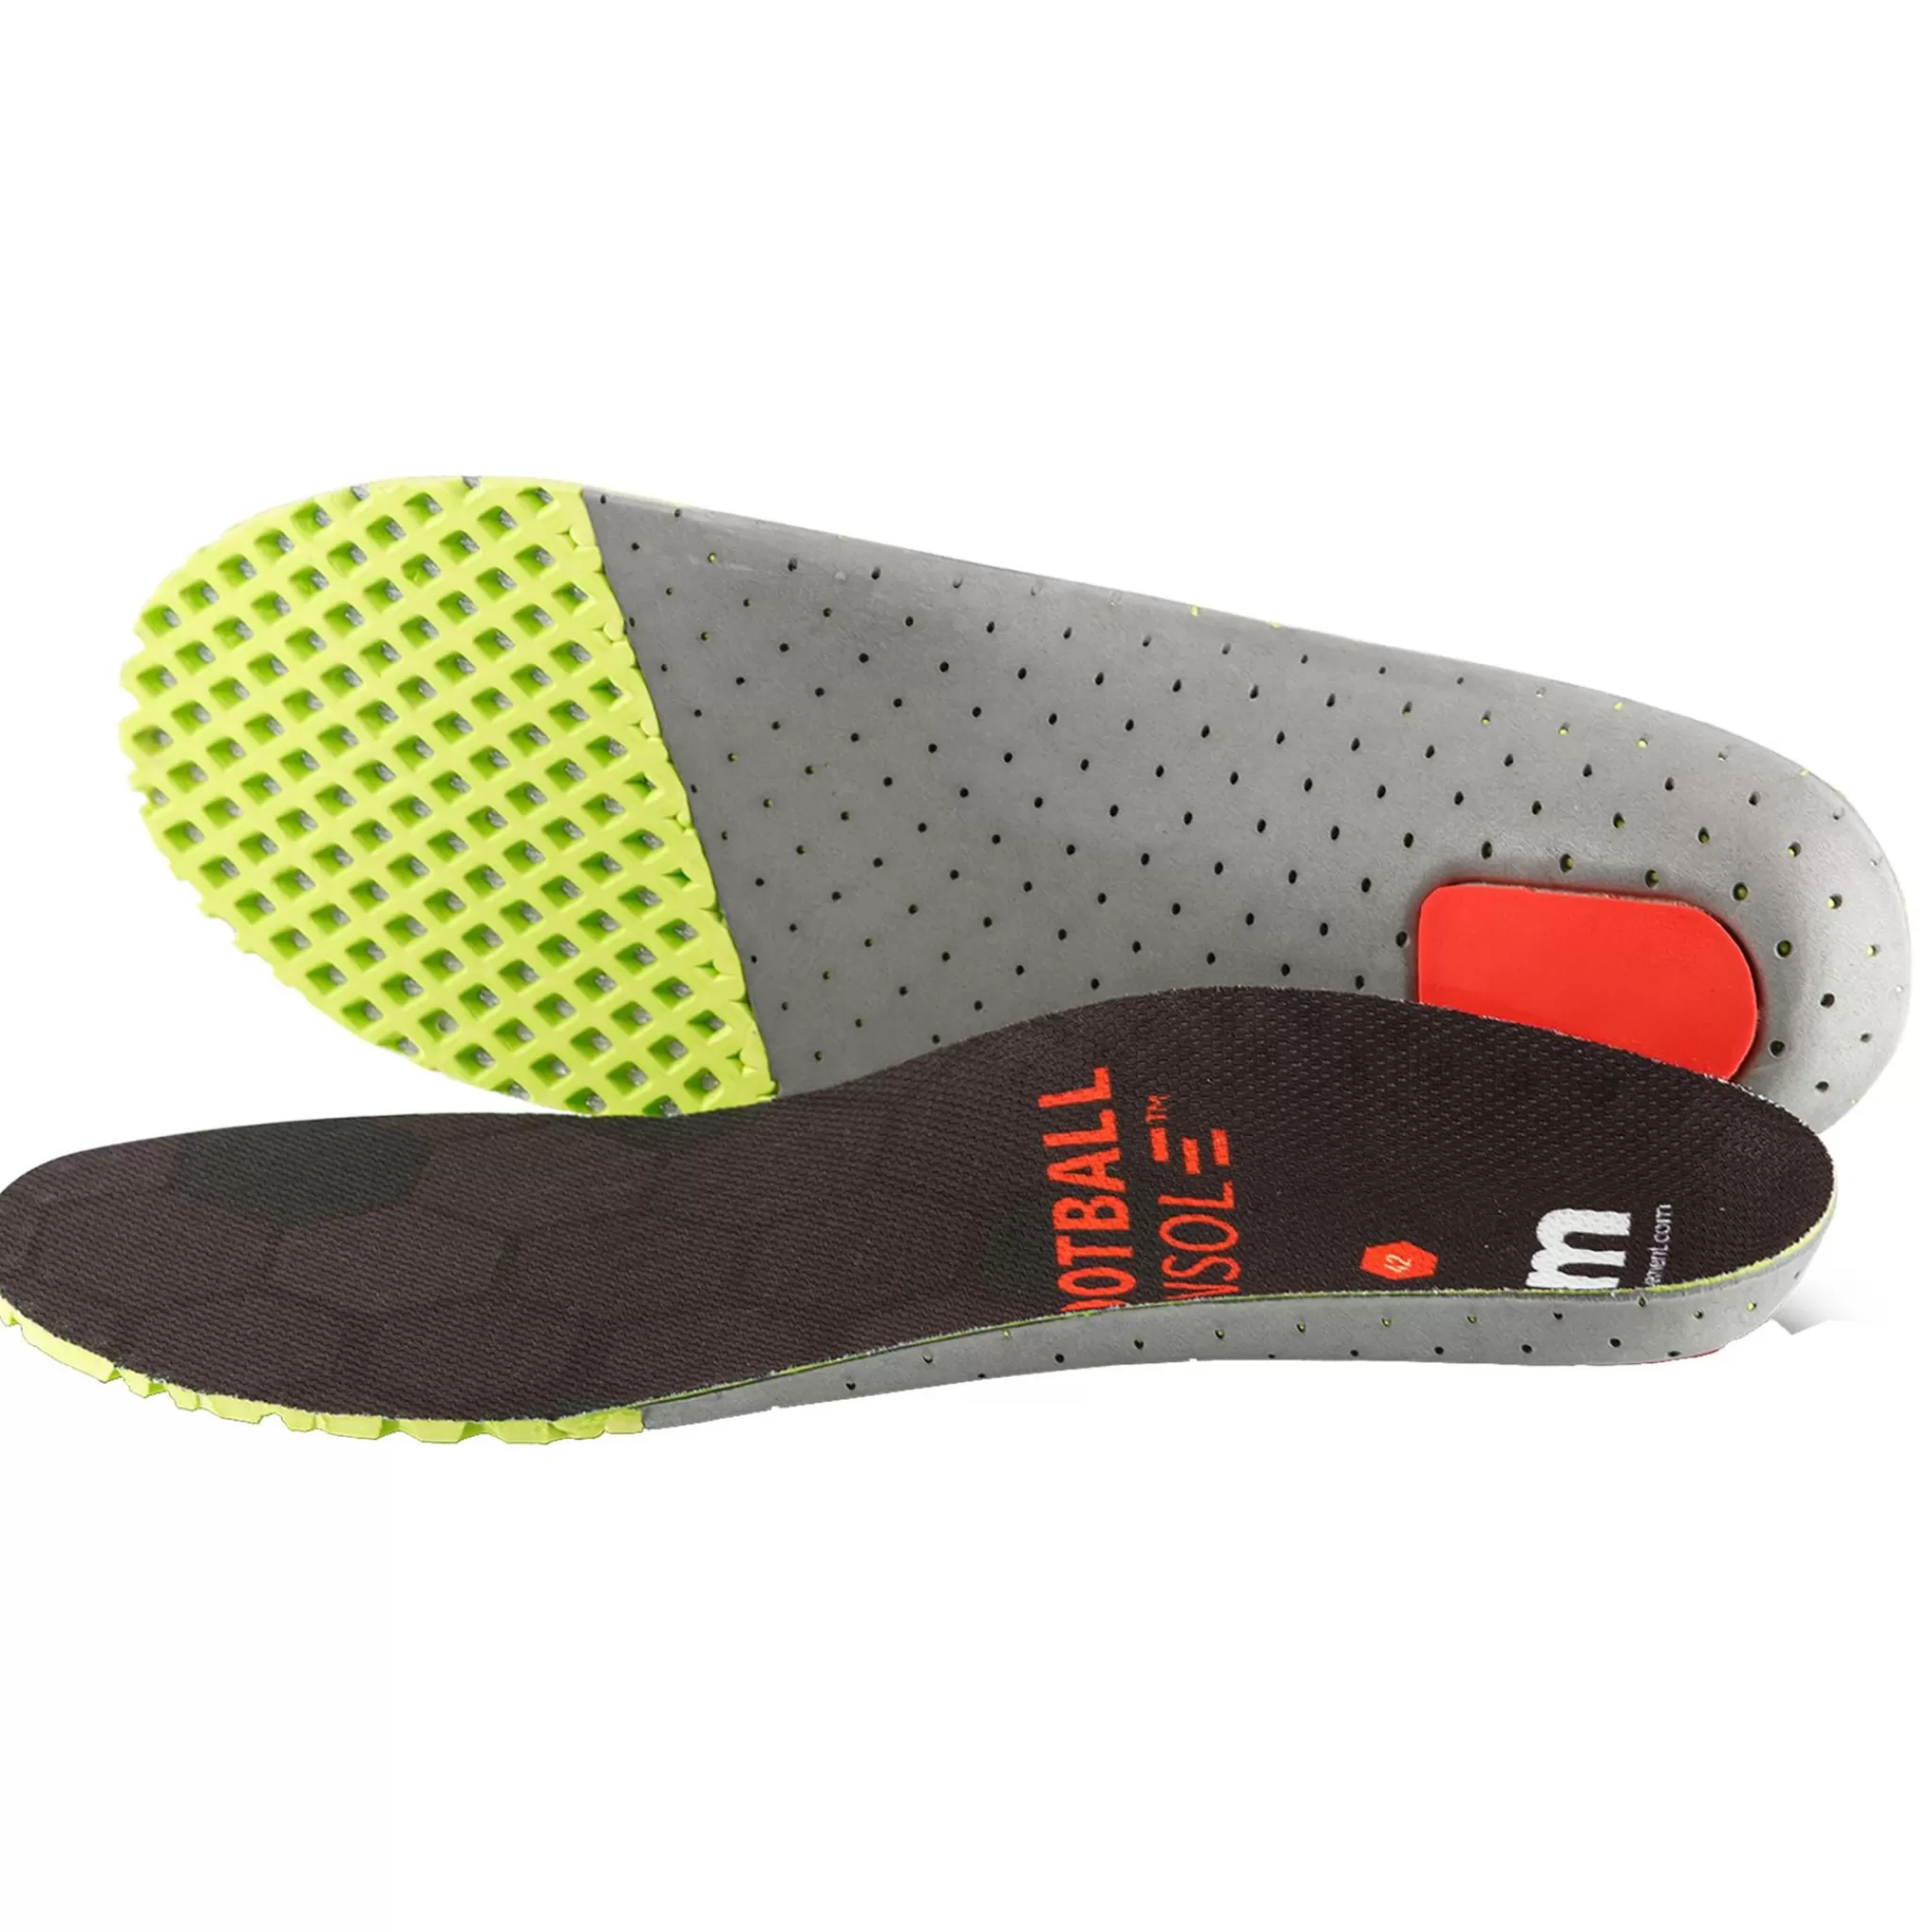 Discount Ortho Movement Football Insole, Innersale